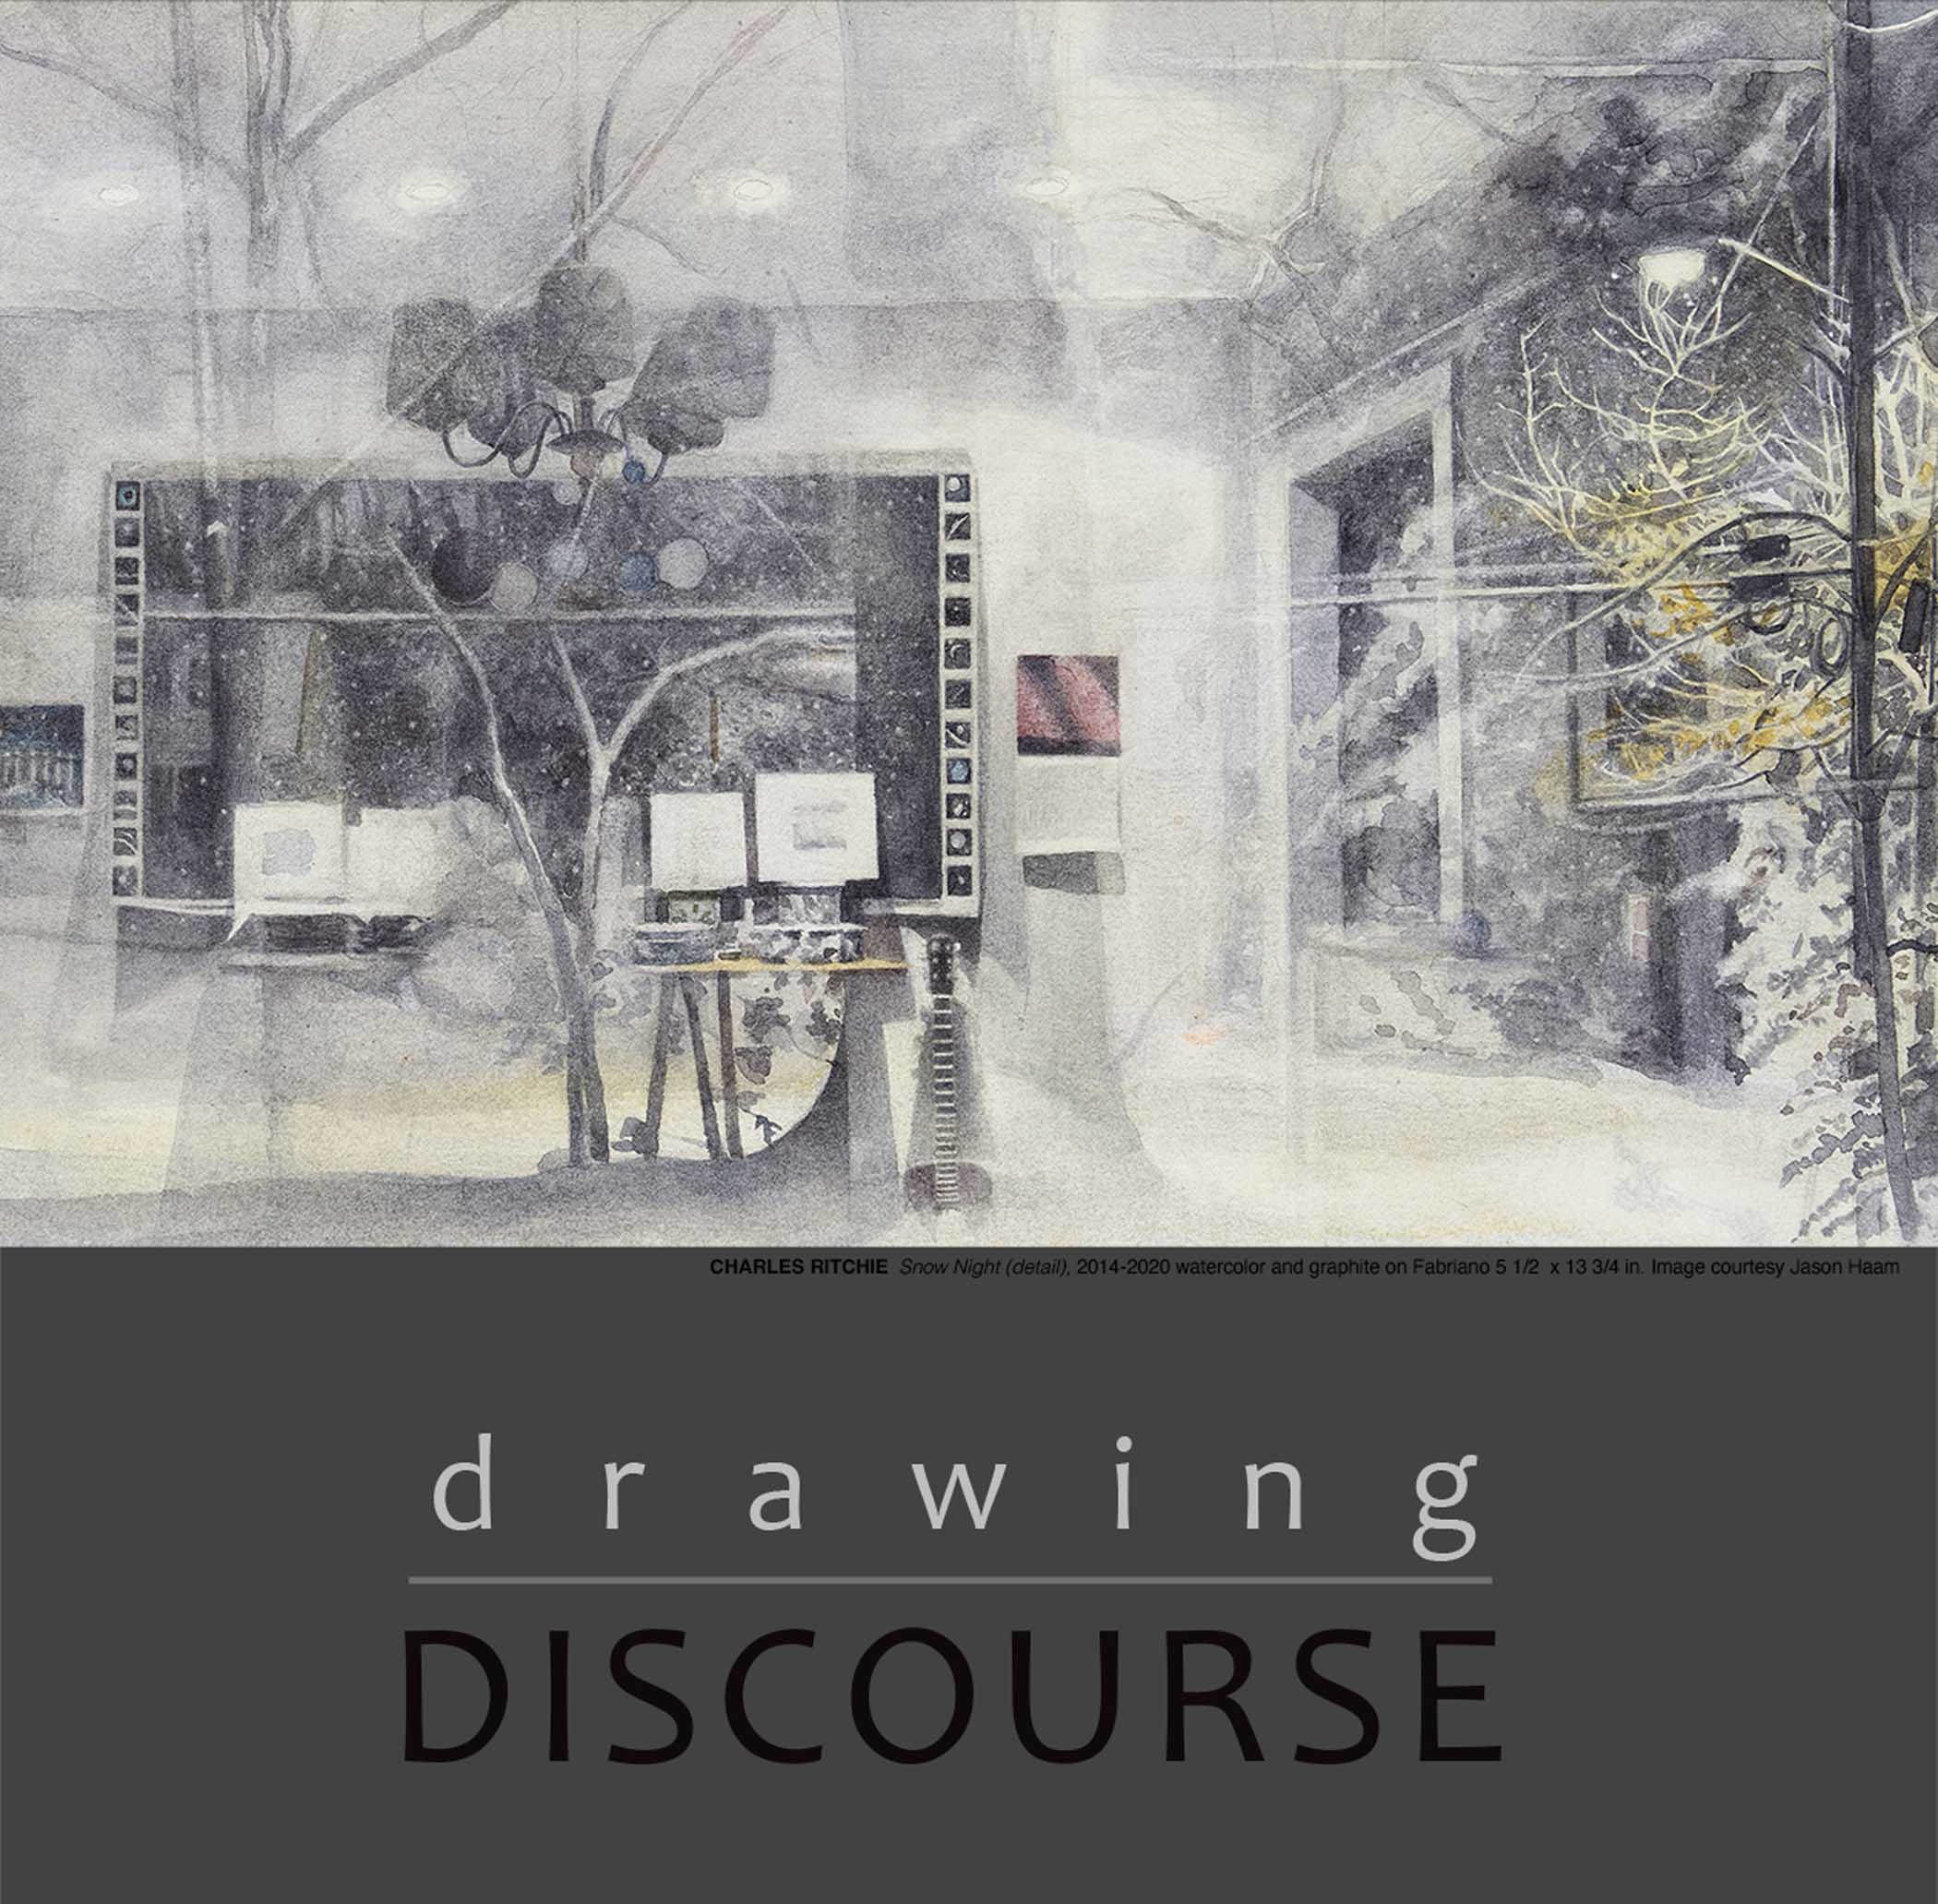 Drawing Discourse 14, University of North Carolina Asheville's juried international exhibition featuring juror Charles Ritchie image